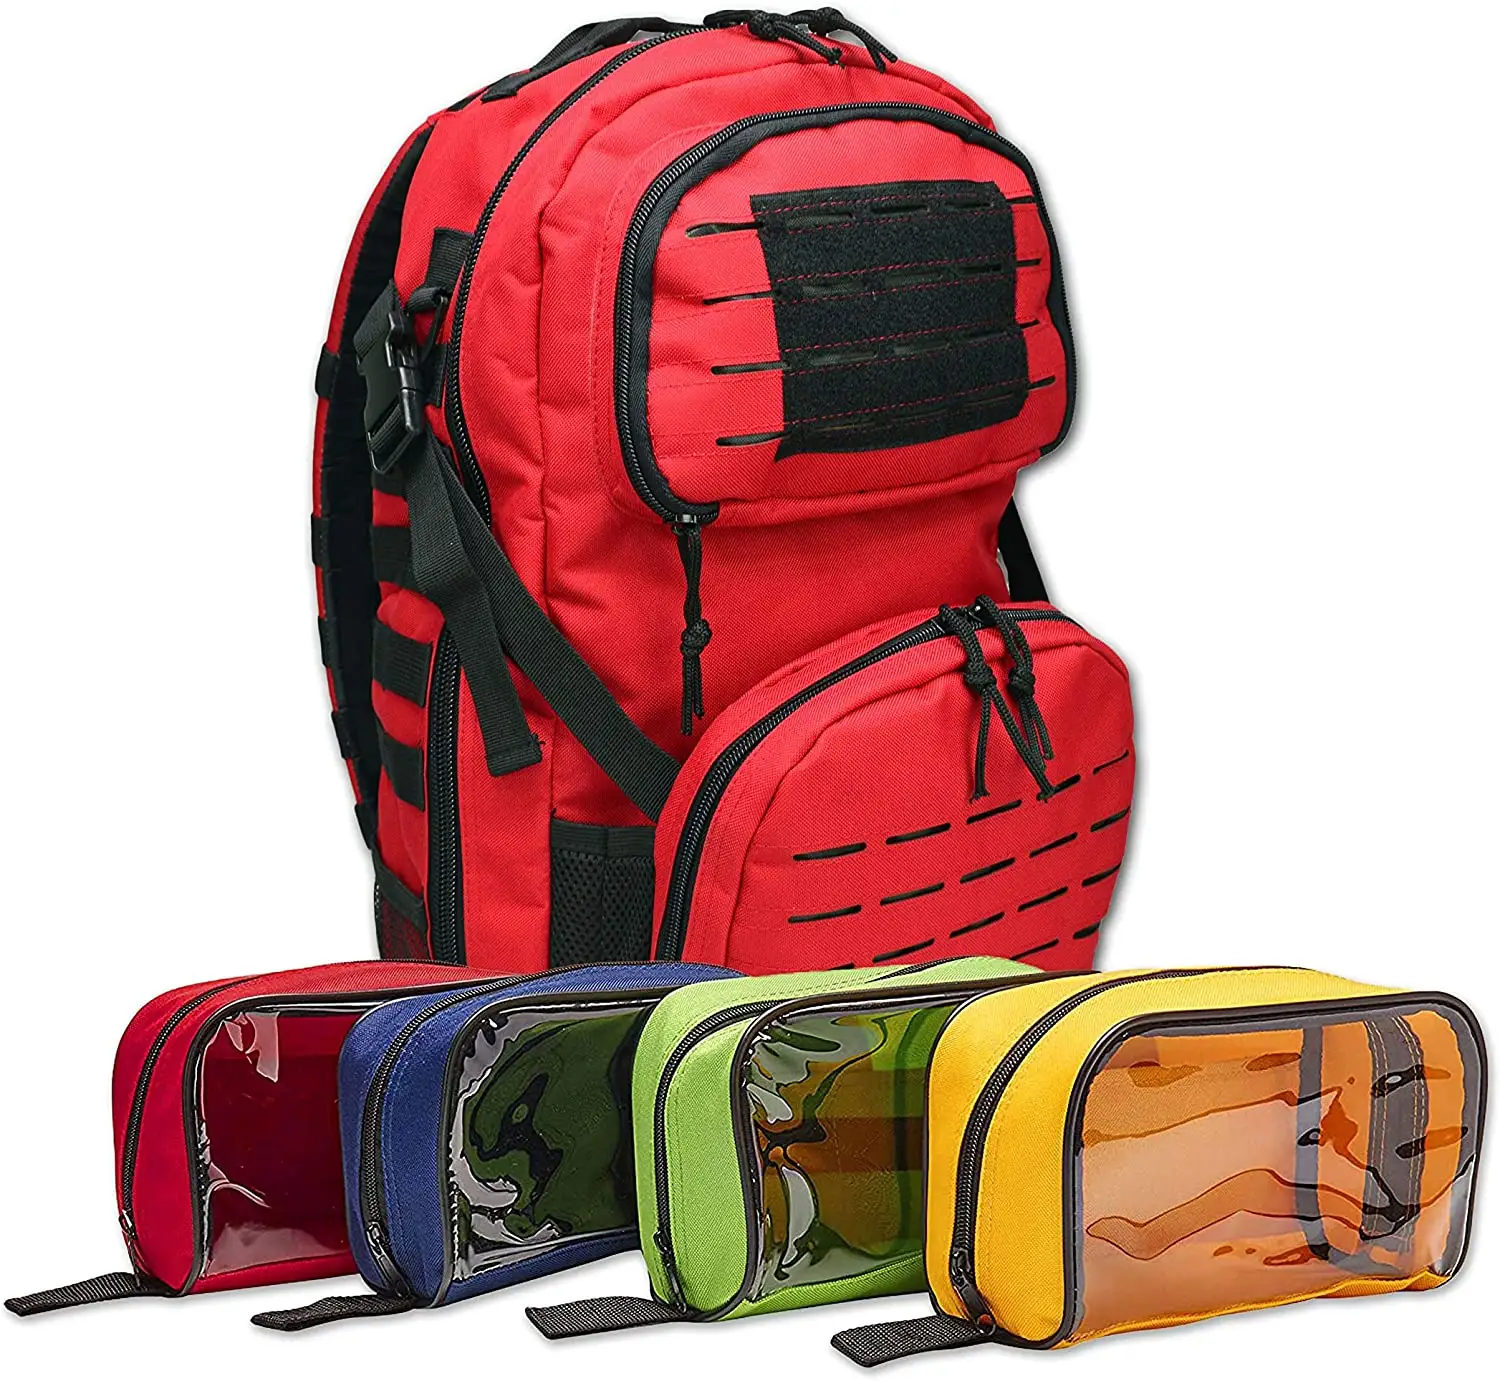 Premium Stocked Tactical EMS/EMT Trauma First Aid Responder Medical Kit Backpack  Red